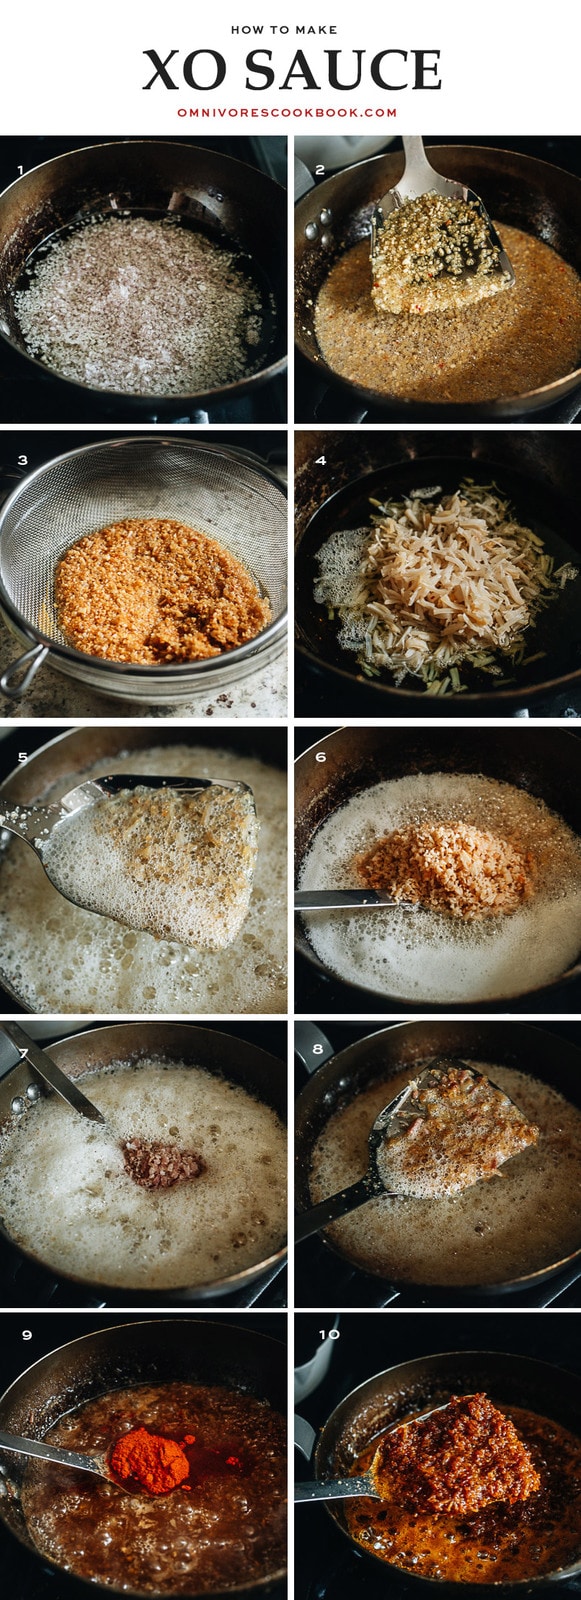 How to make XO sauce step-by-step